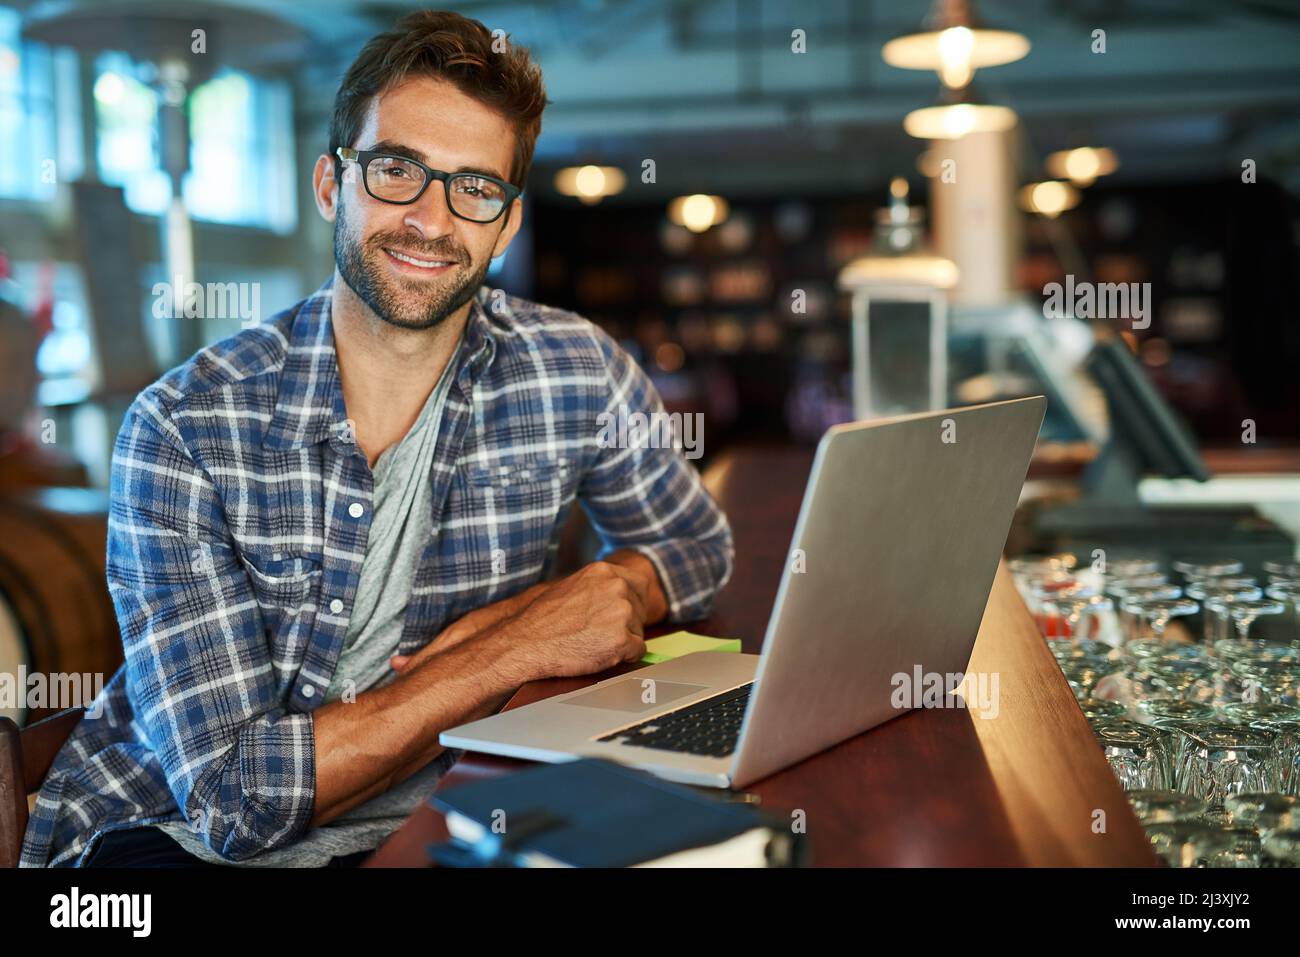 Loving free wifi. Portrait of a handsome young man sitting in a cafe using a laptop. Stock Photo